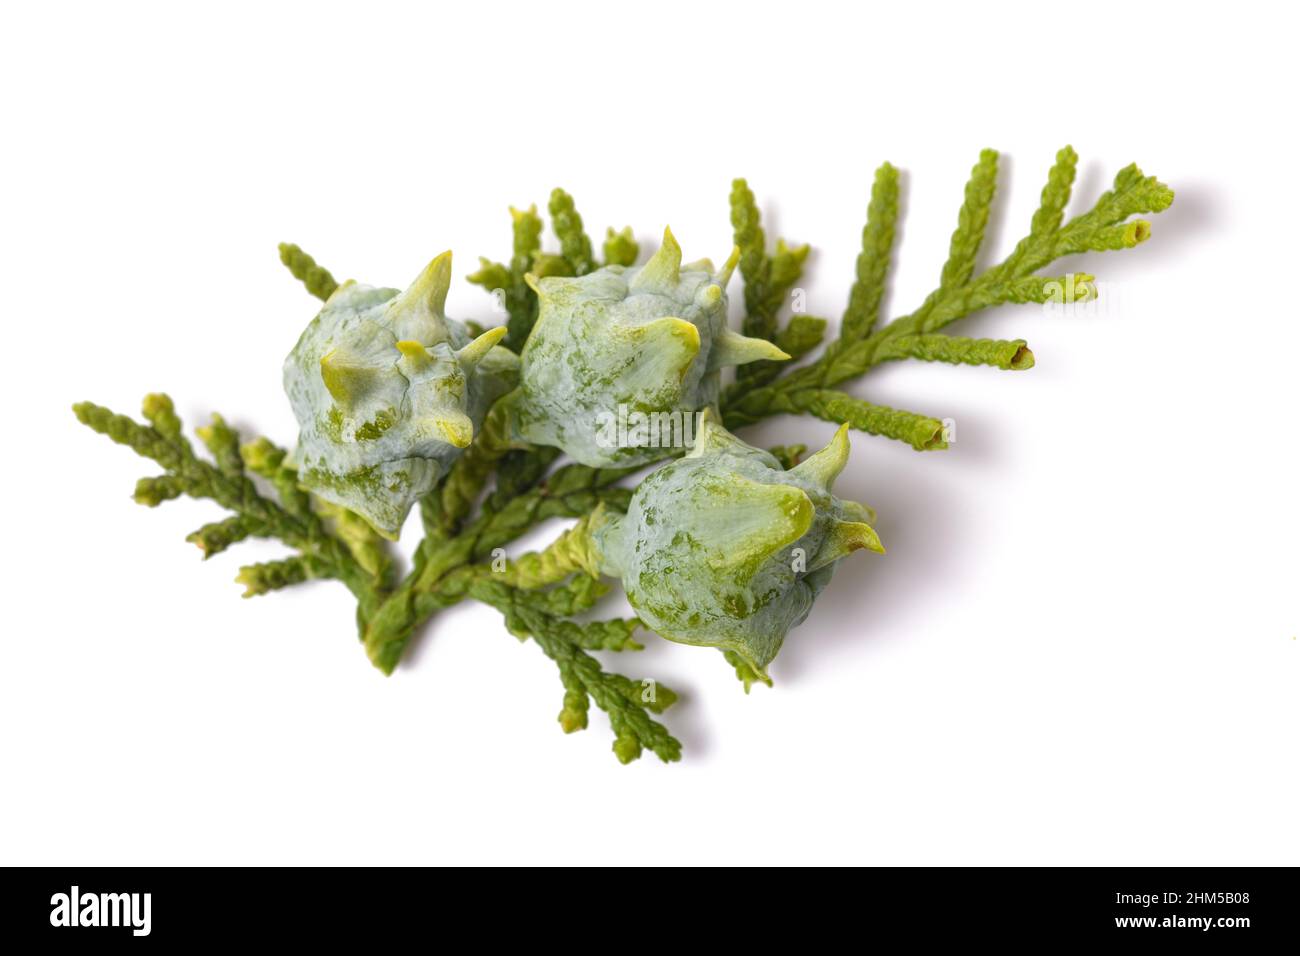 Chinese thuja with cones isolated on white Stock Photo